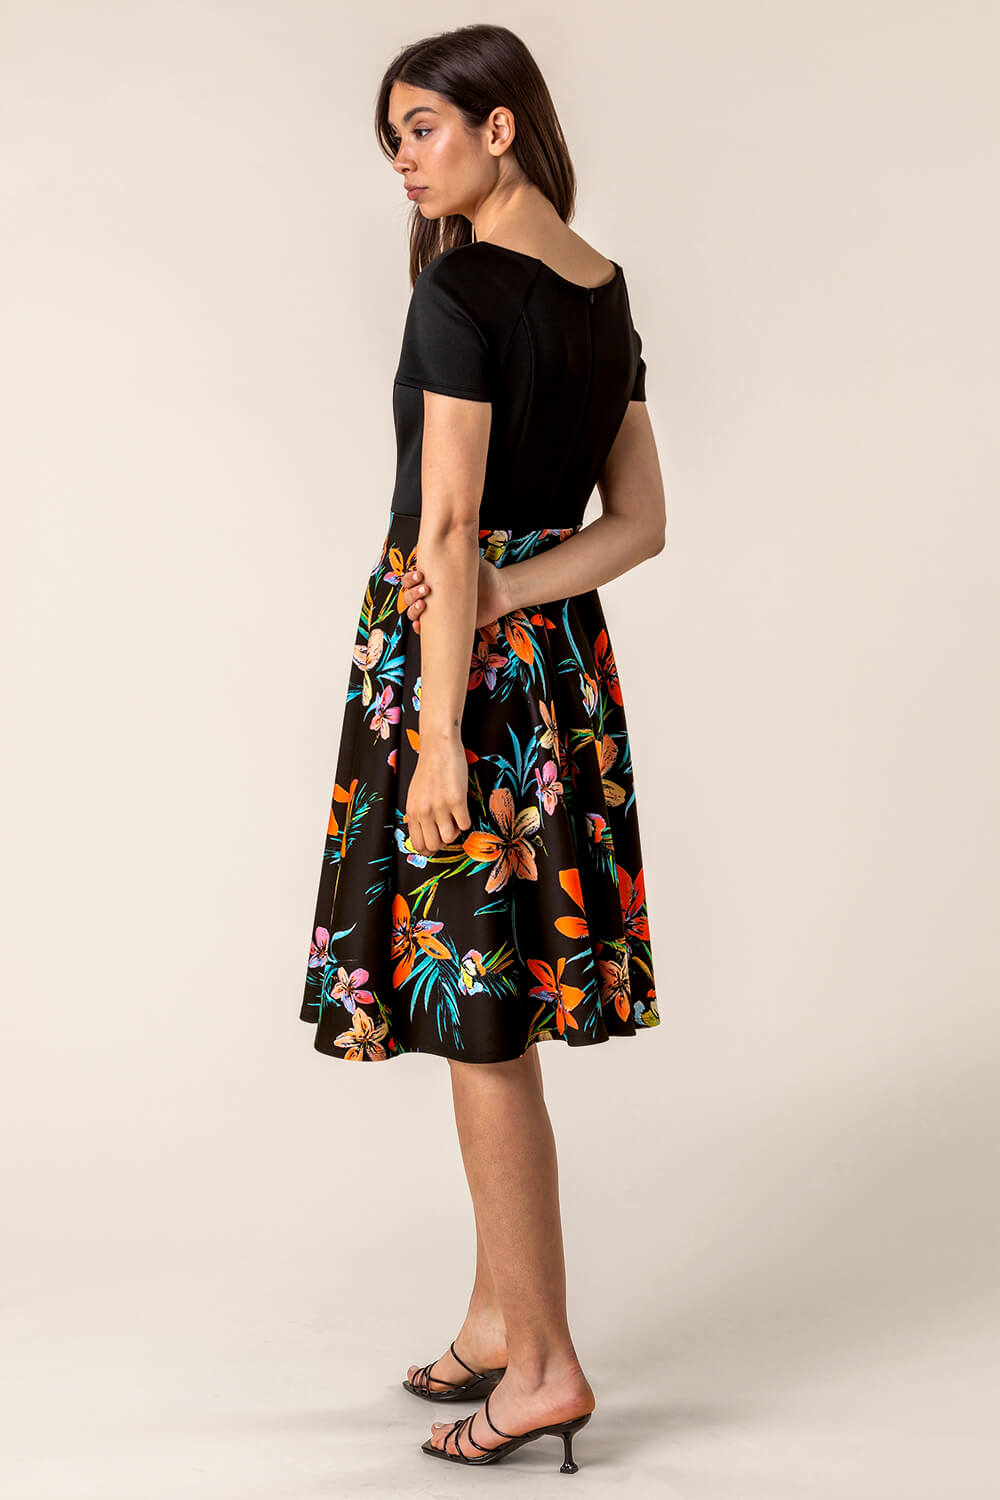 Black Tropical Print Fit & Flare Dress, Image 2 of 4